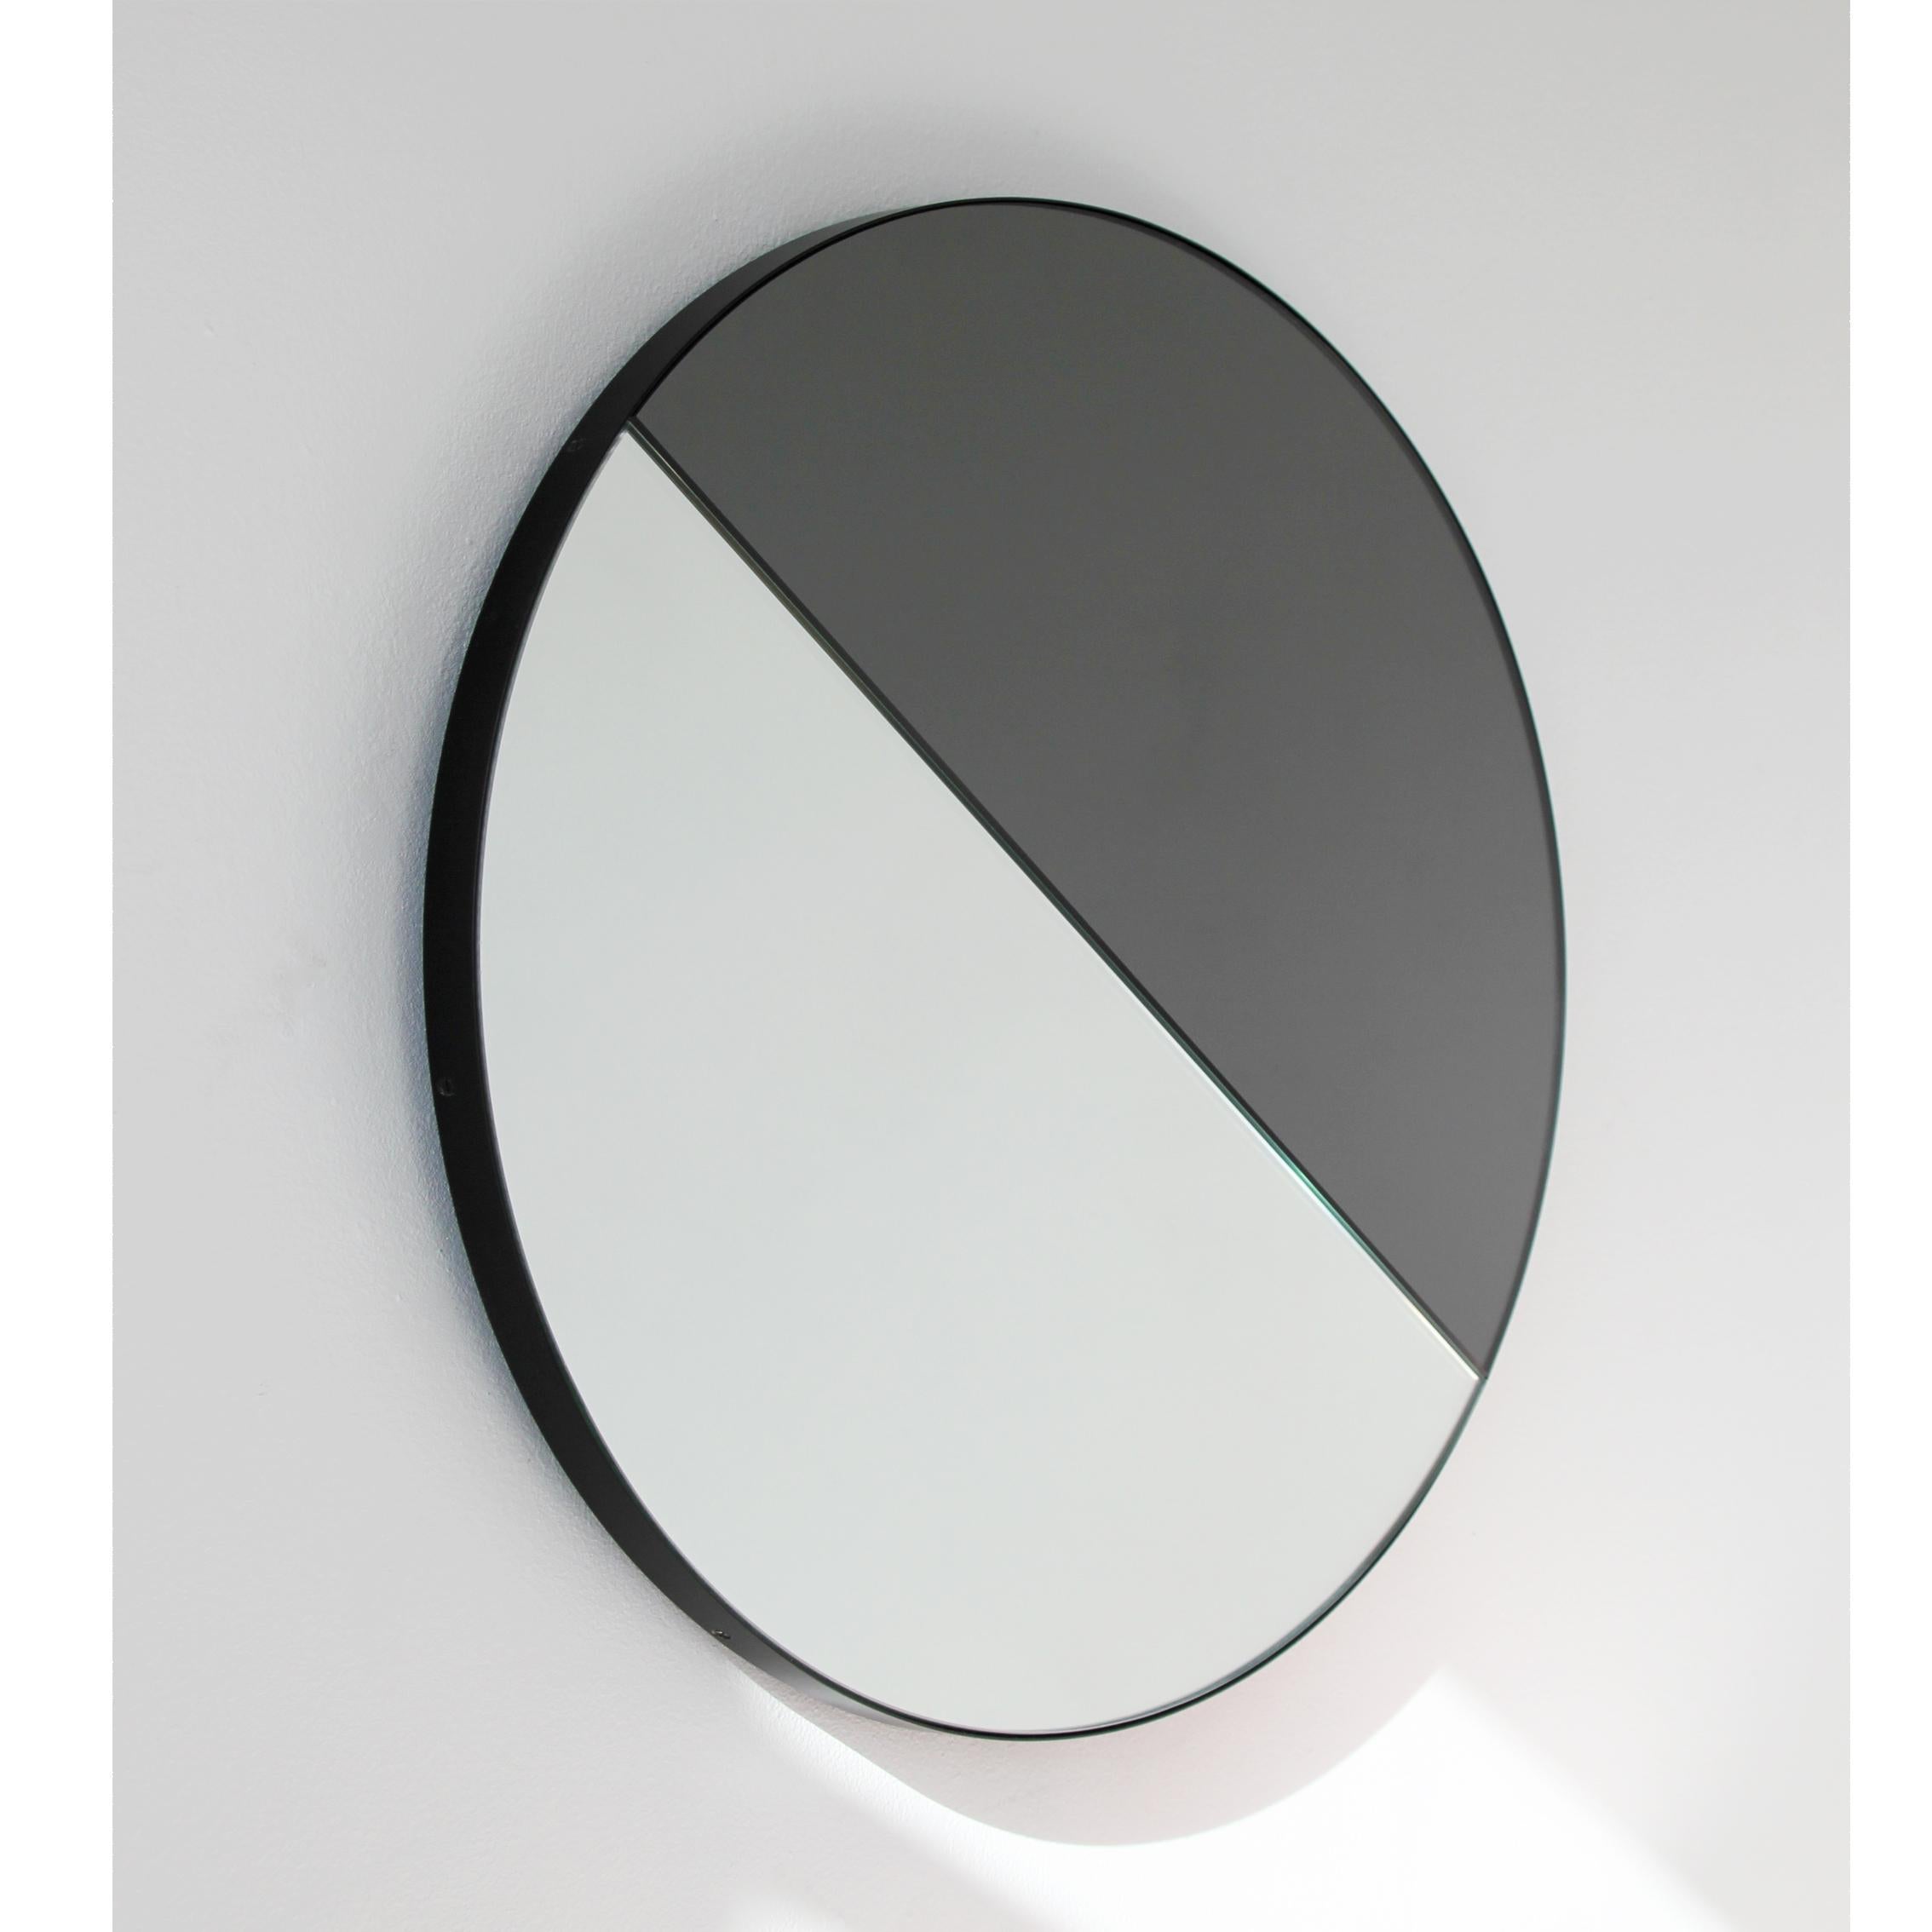 Orbis Dualis Mixed Tint Contemporary Round Mirror with Black Frame, Large For Sale 1